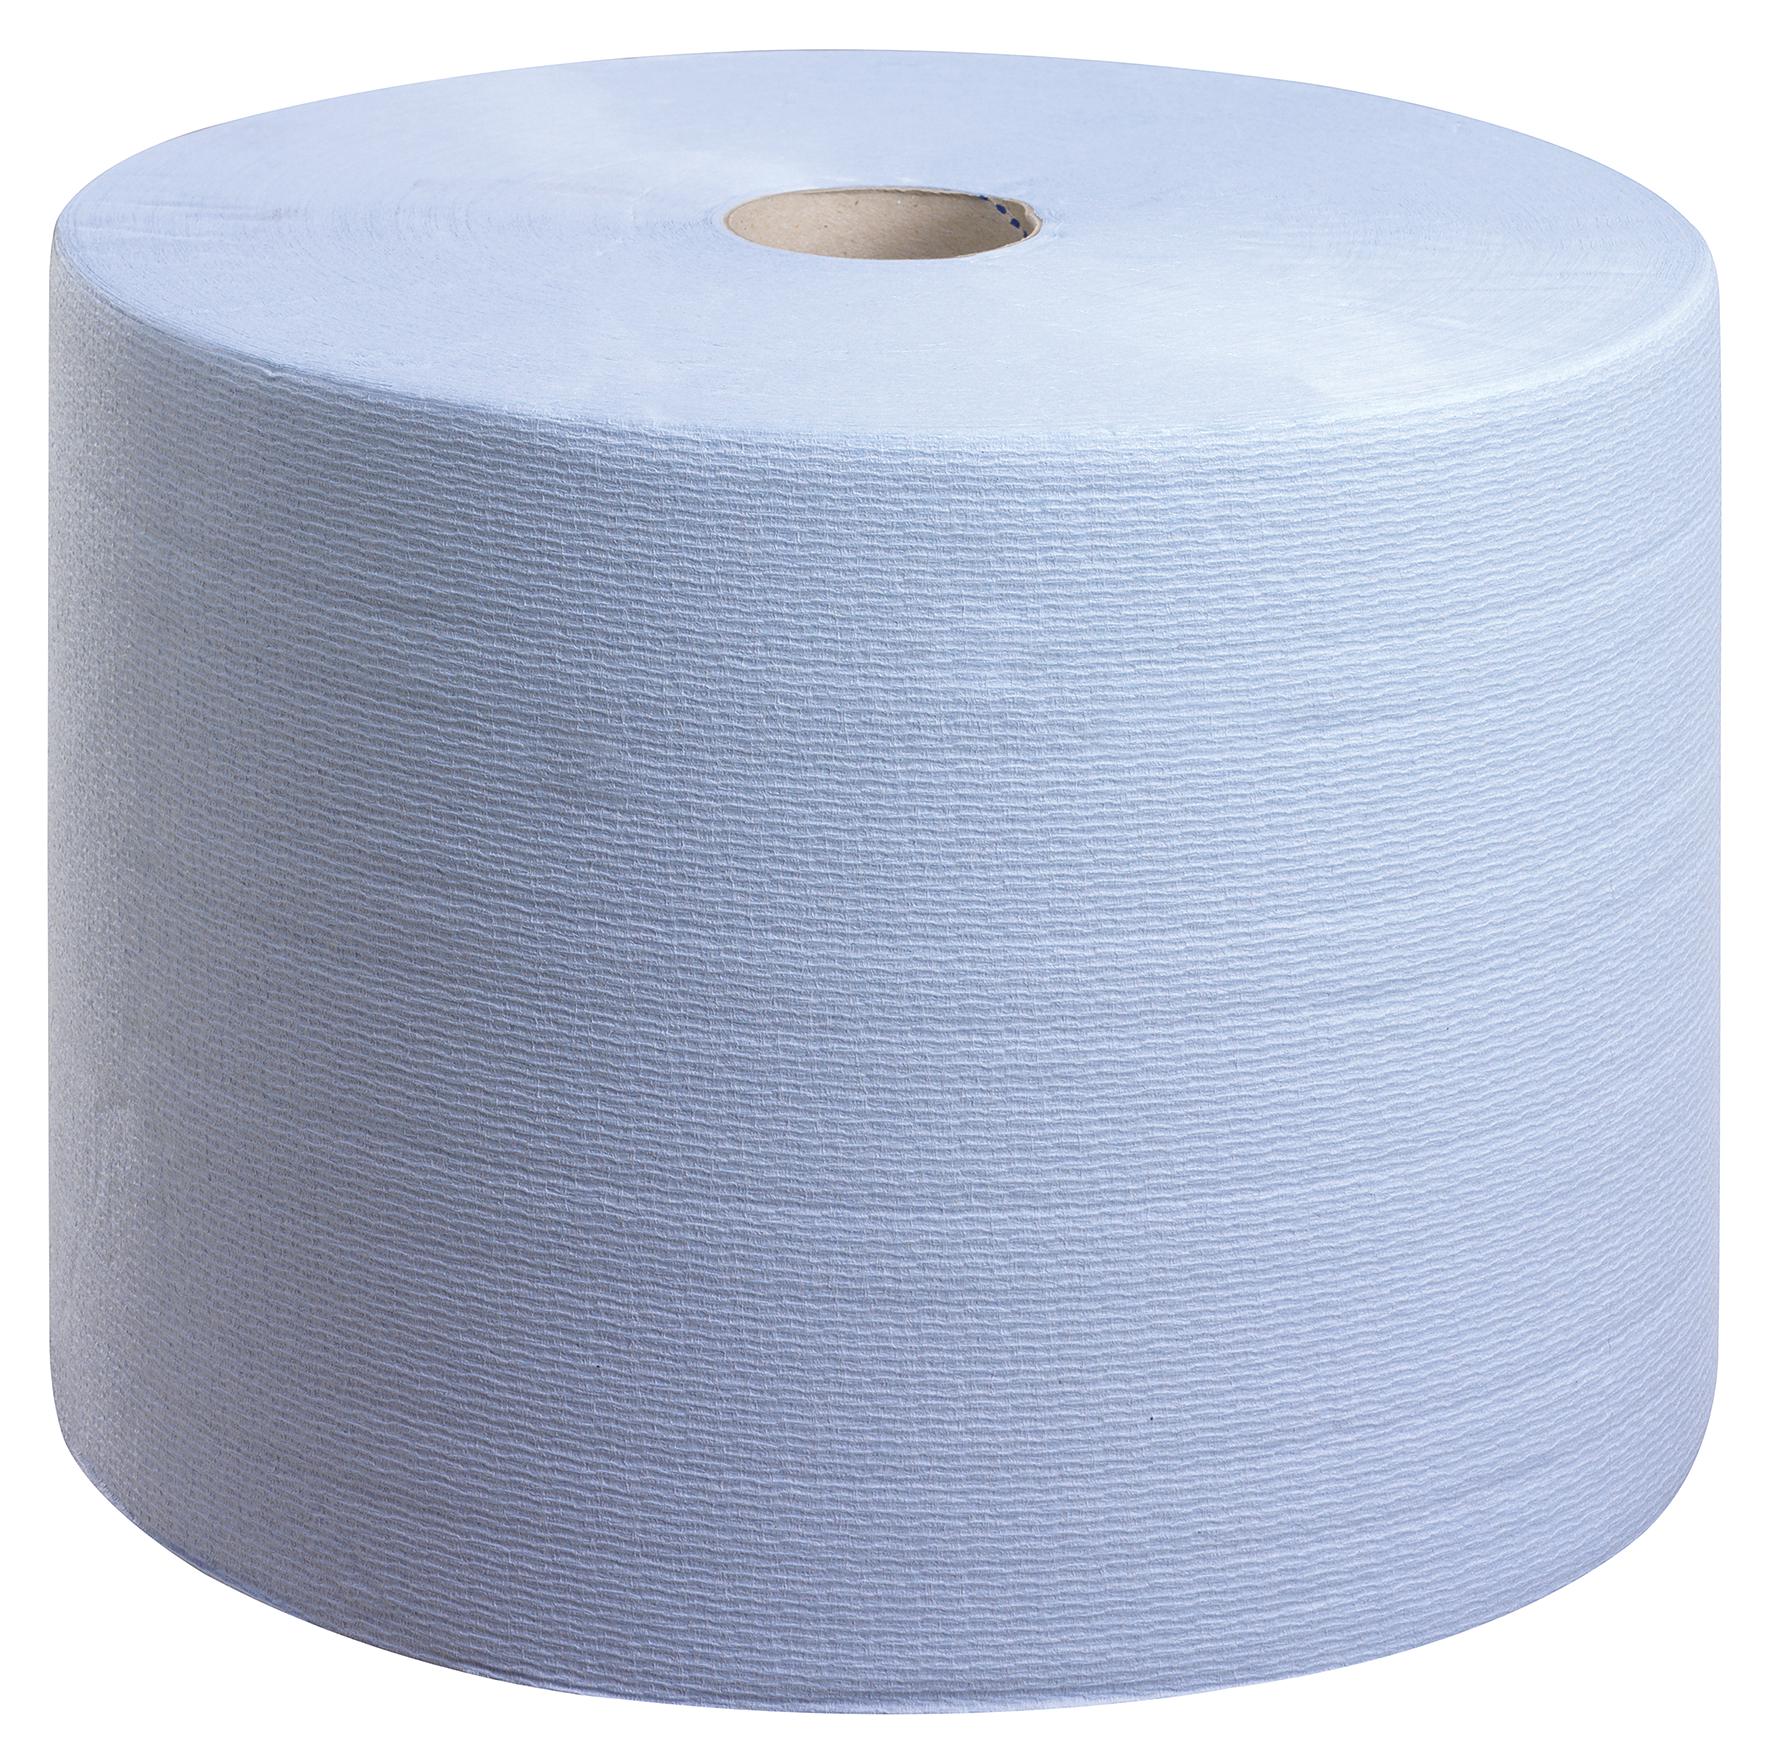 7140 WYPALL L10 LARGE ROLL KIMBERLY CLARK